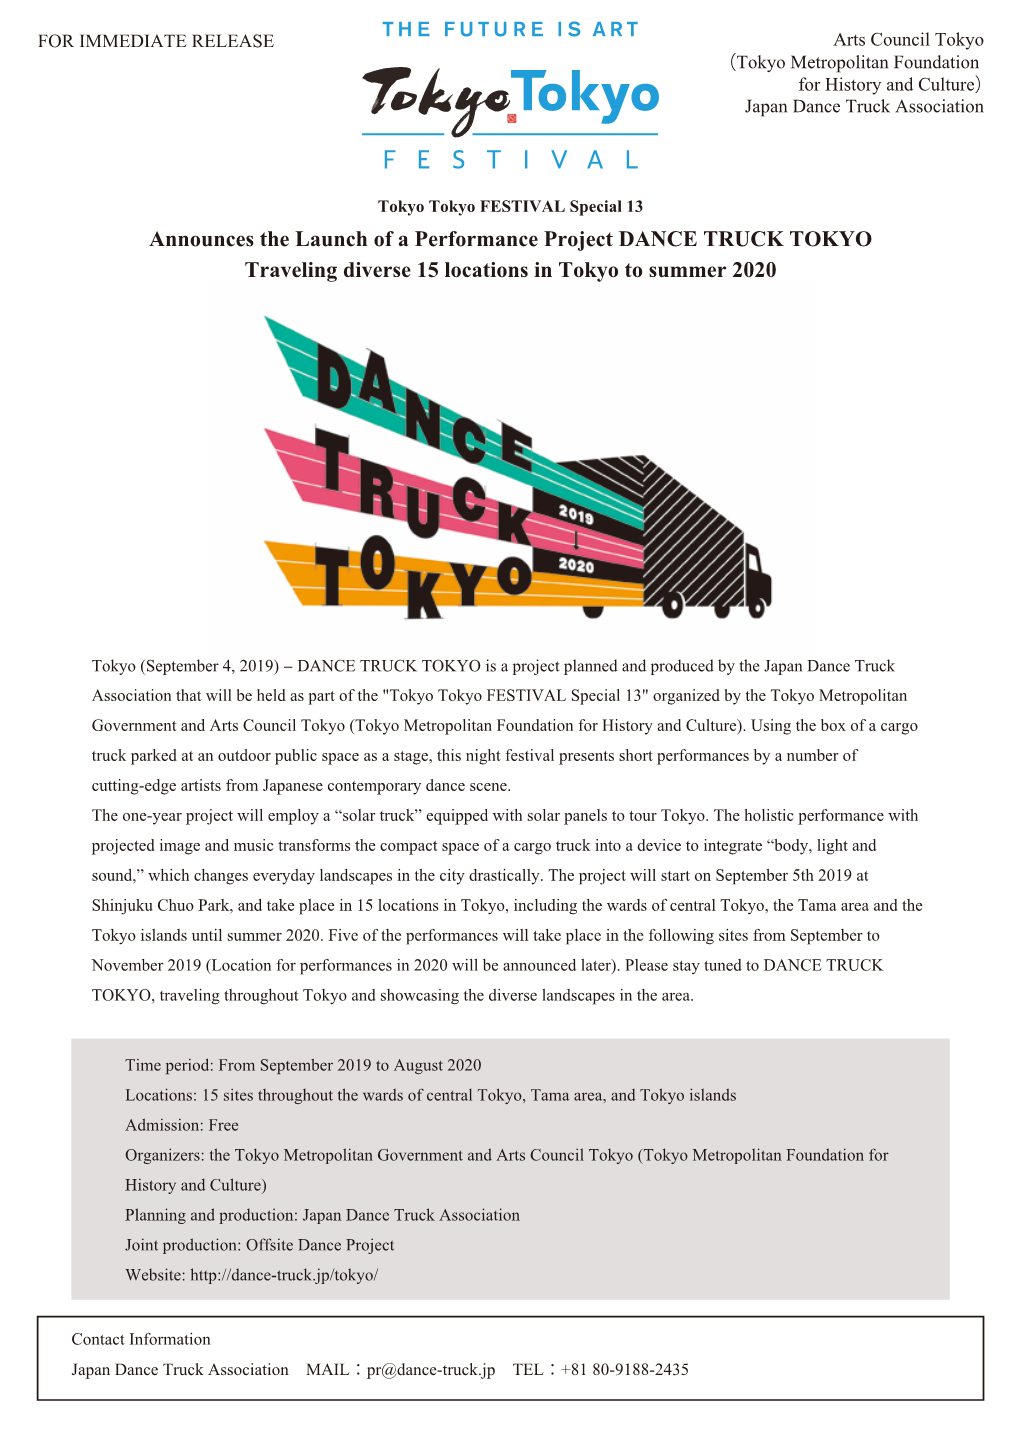 Announces the Launch of a Performance Project DANCE TRUCK TOKYO Traveling Diverse 15 Locations in Tokyo to Summer 2020